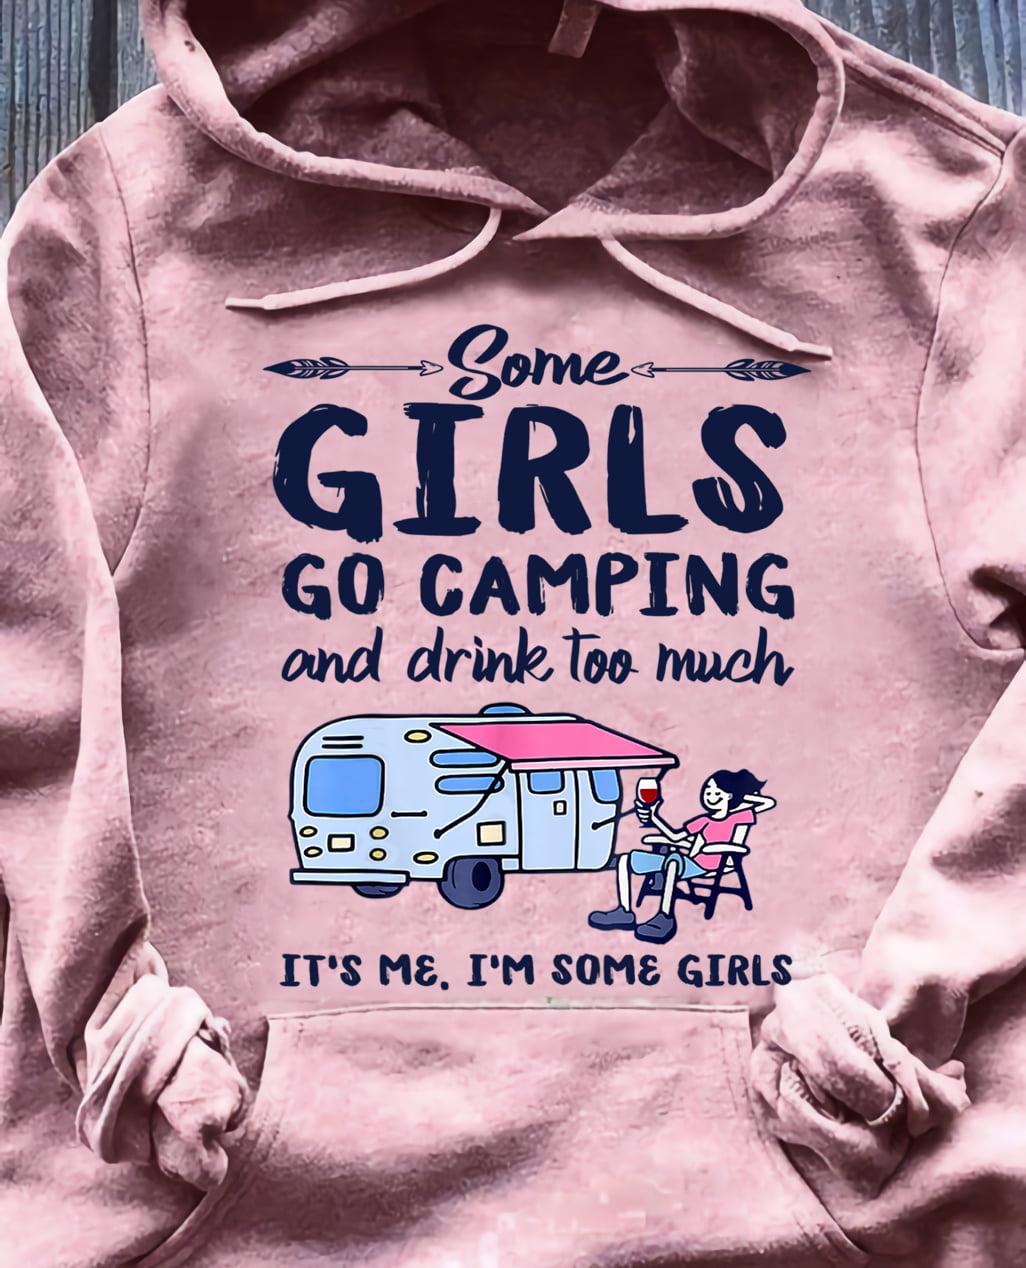 Camping Girl - Some girls go camping and drink too much it's me i'm some girls